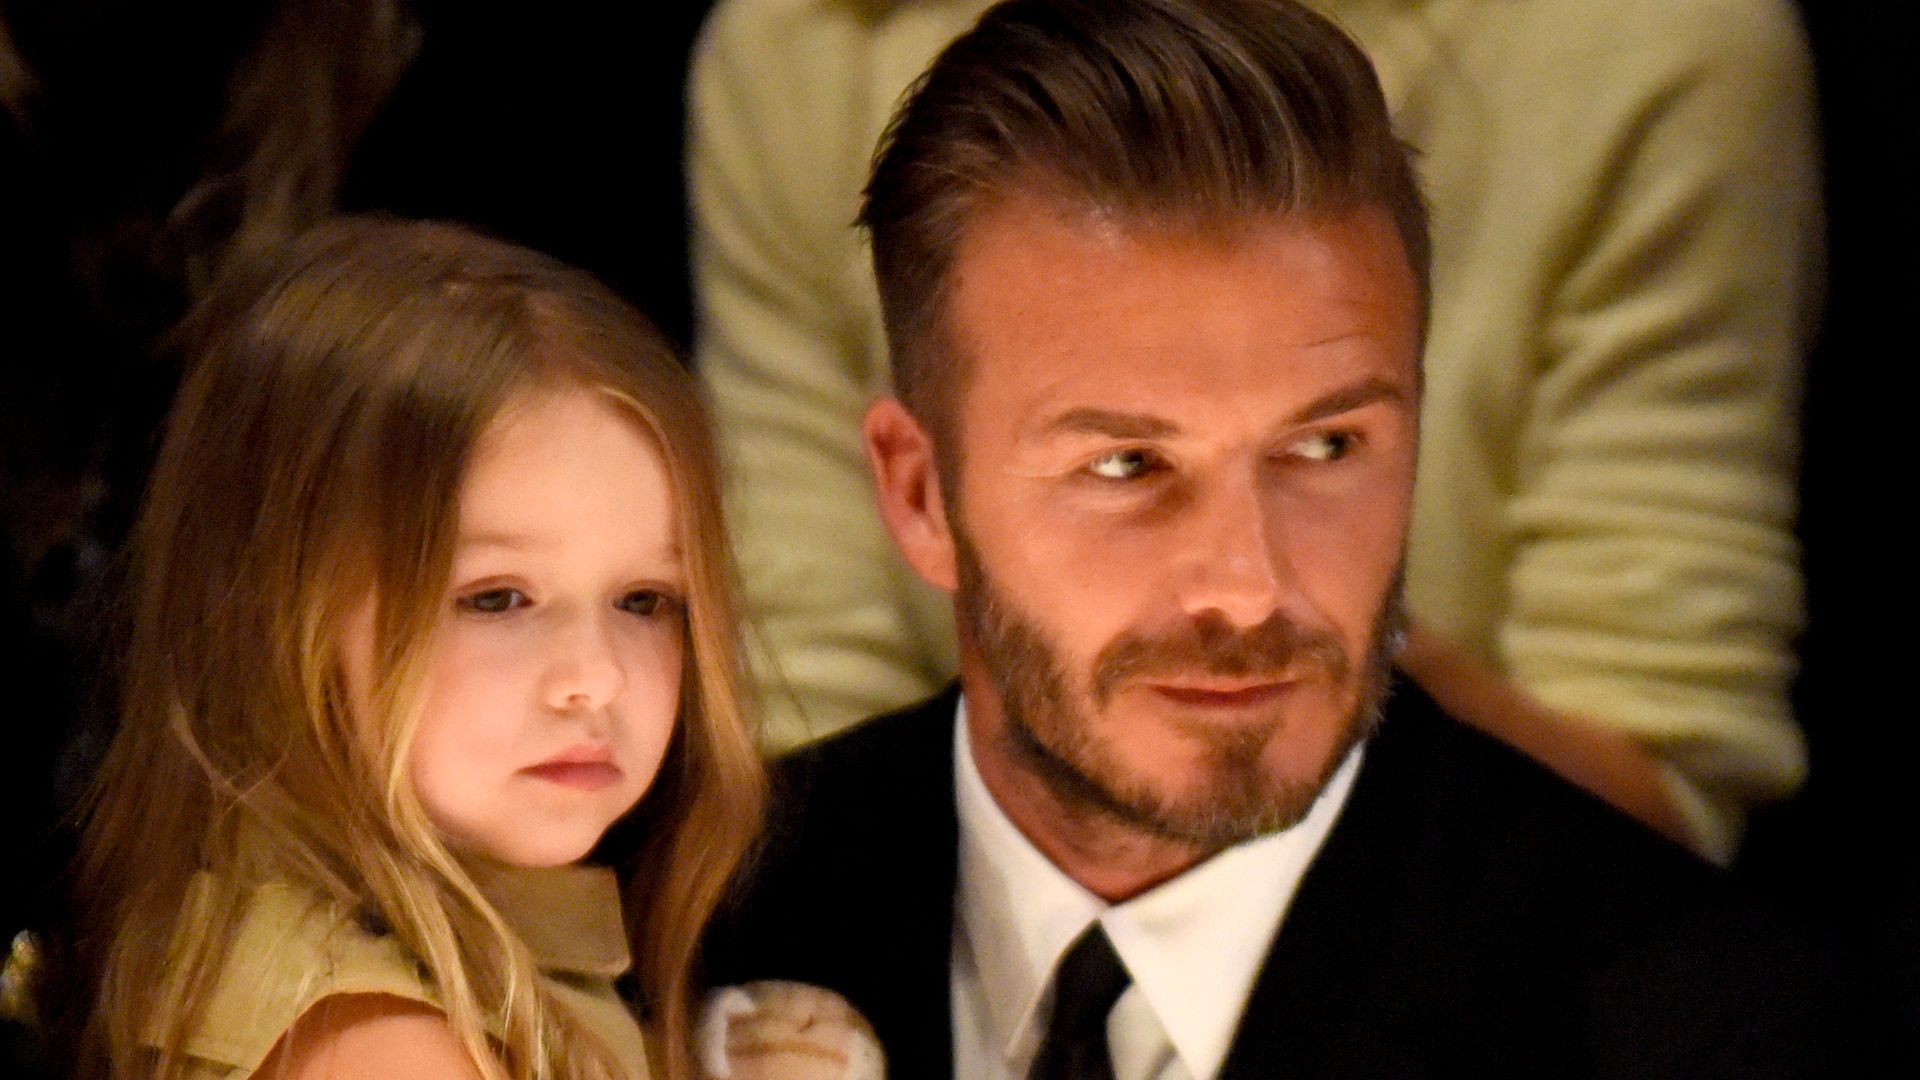  Harper Beckham (L) and David Beckham attend the Burberry "London in Los Angeles" event at Griffith Observatory on April 16, 2015 in Los Angeles, California. 